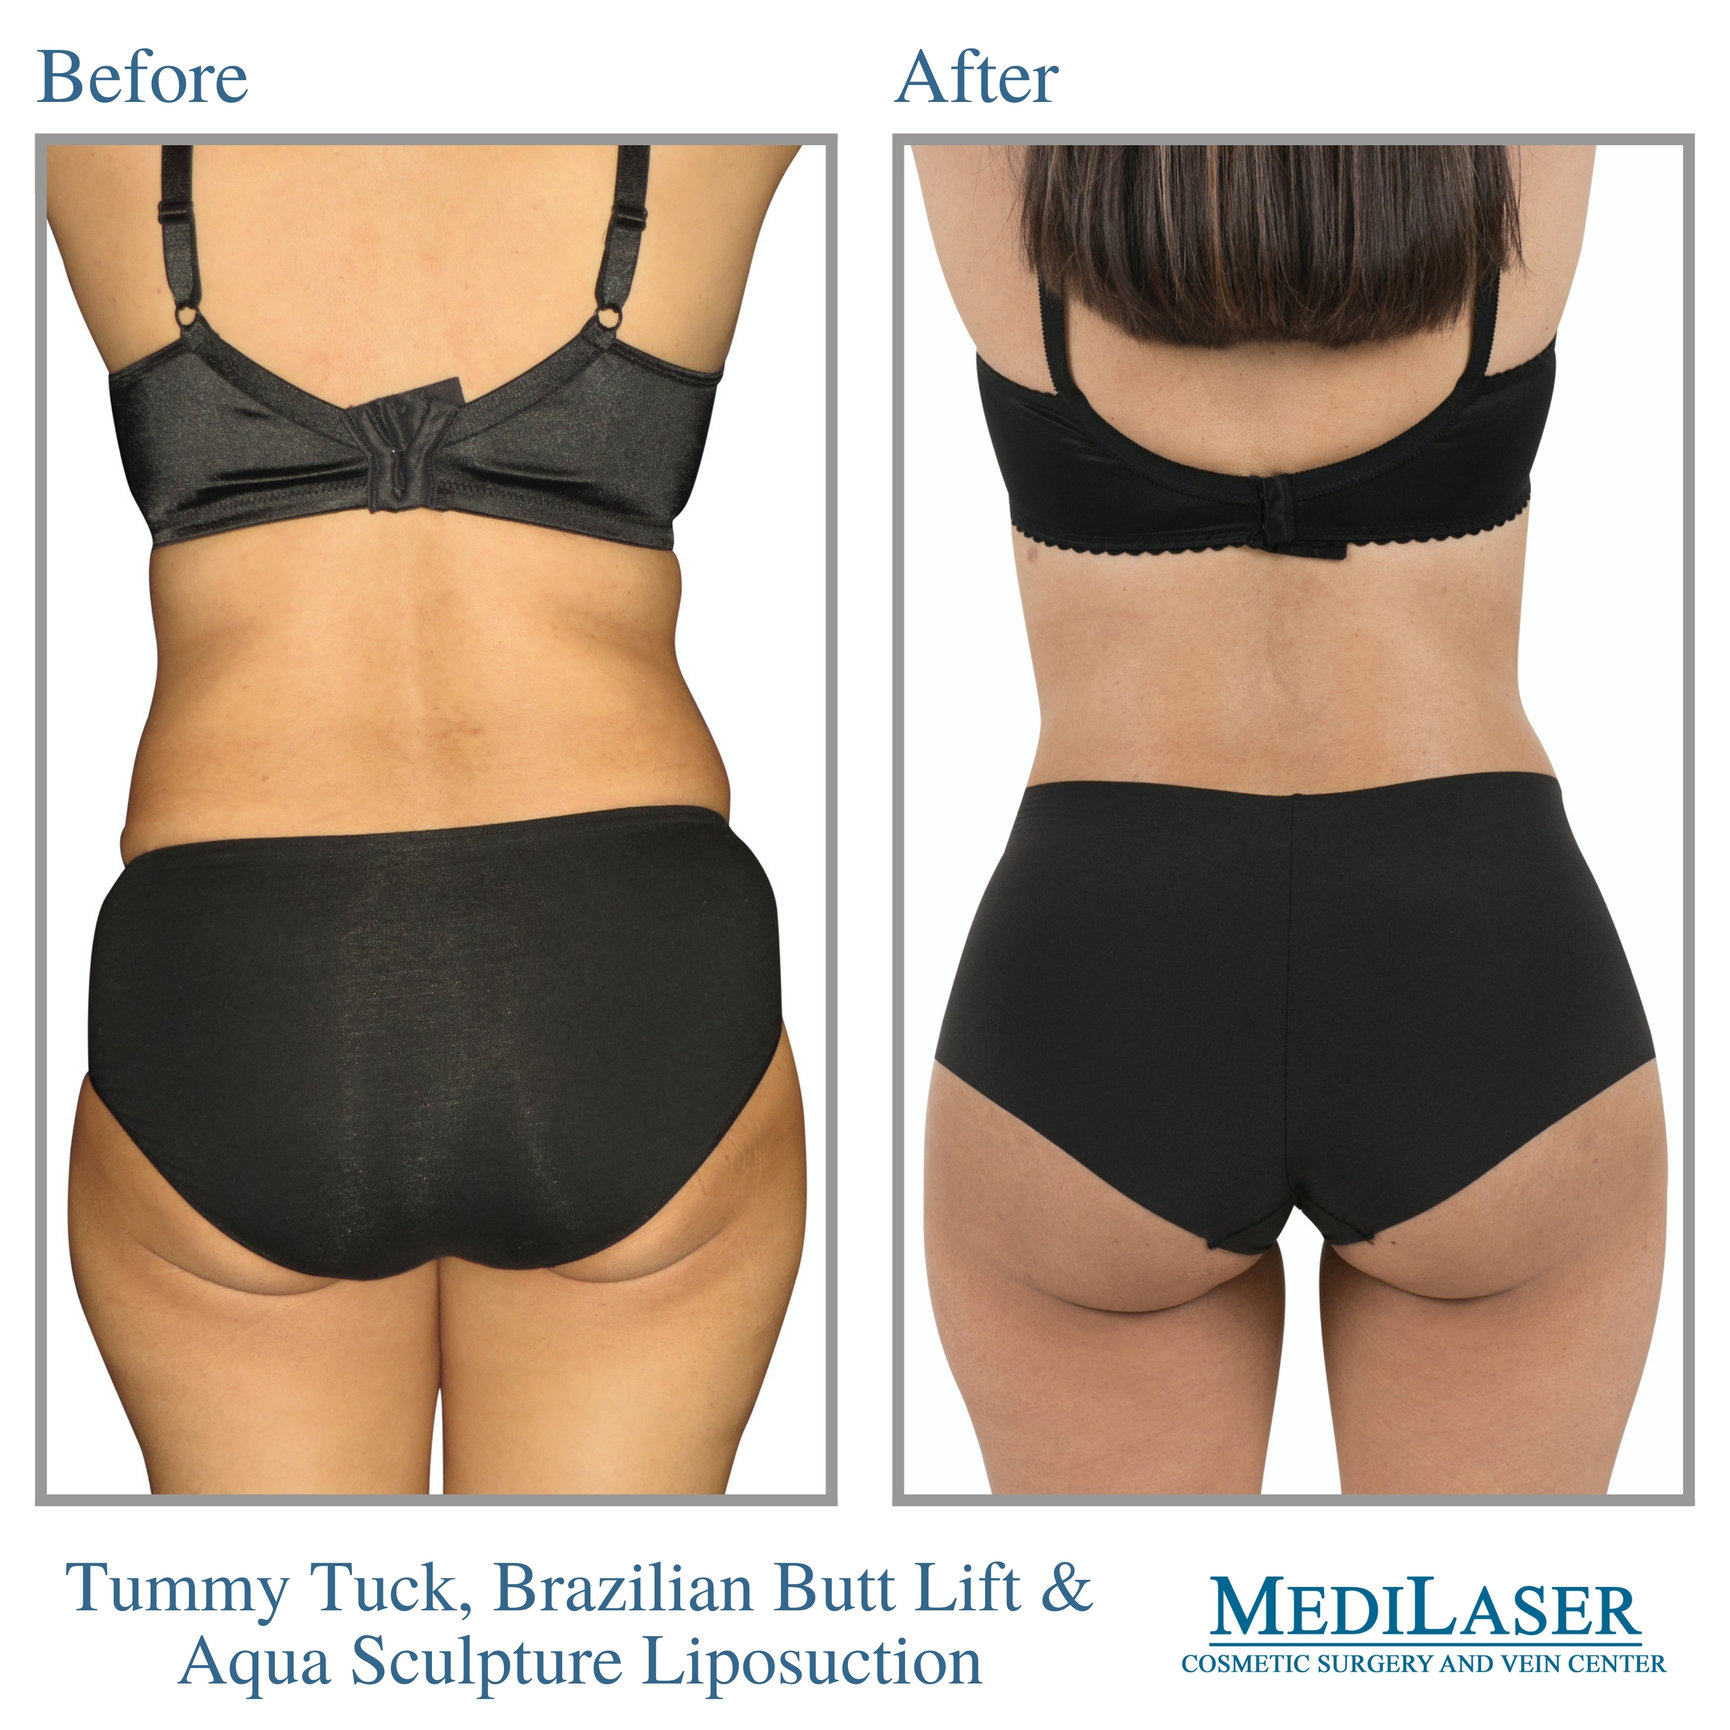 Tummy Tuck, BBL, and Liposuction Before and After, Frisco Texas - Medilaser  Surgery and Vein Center